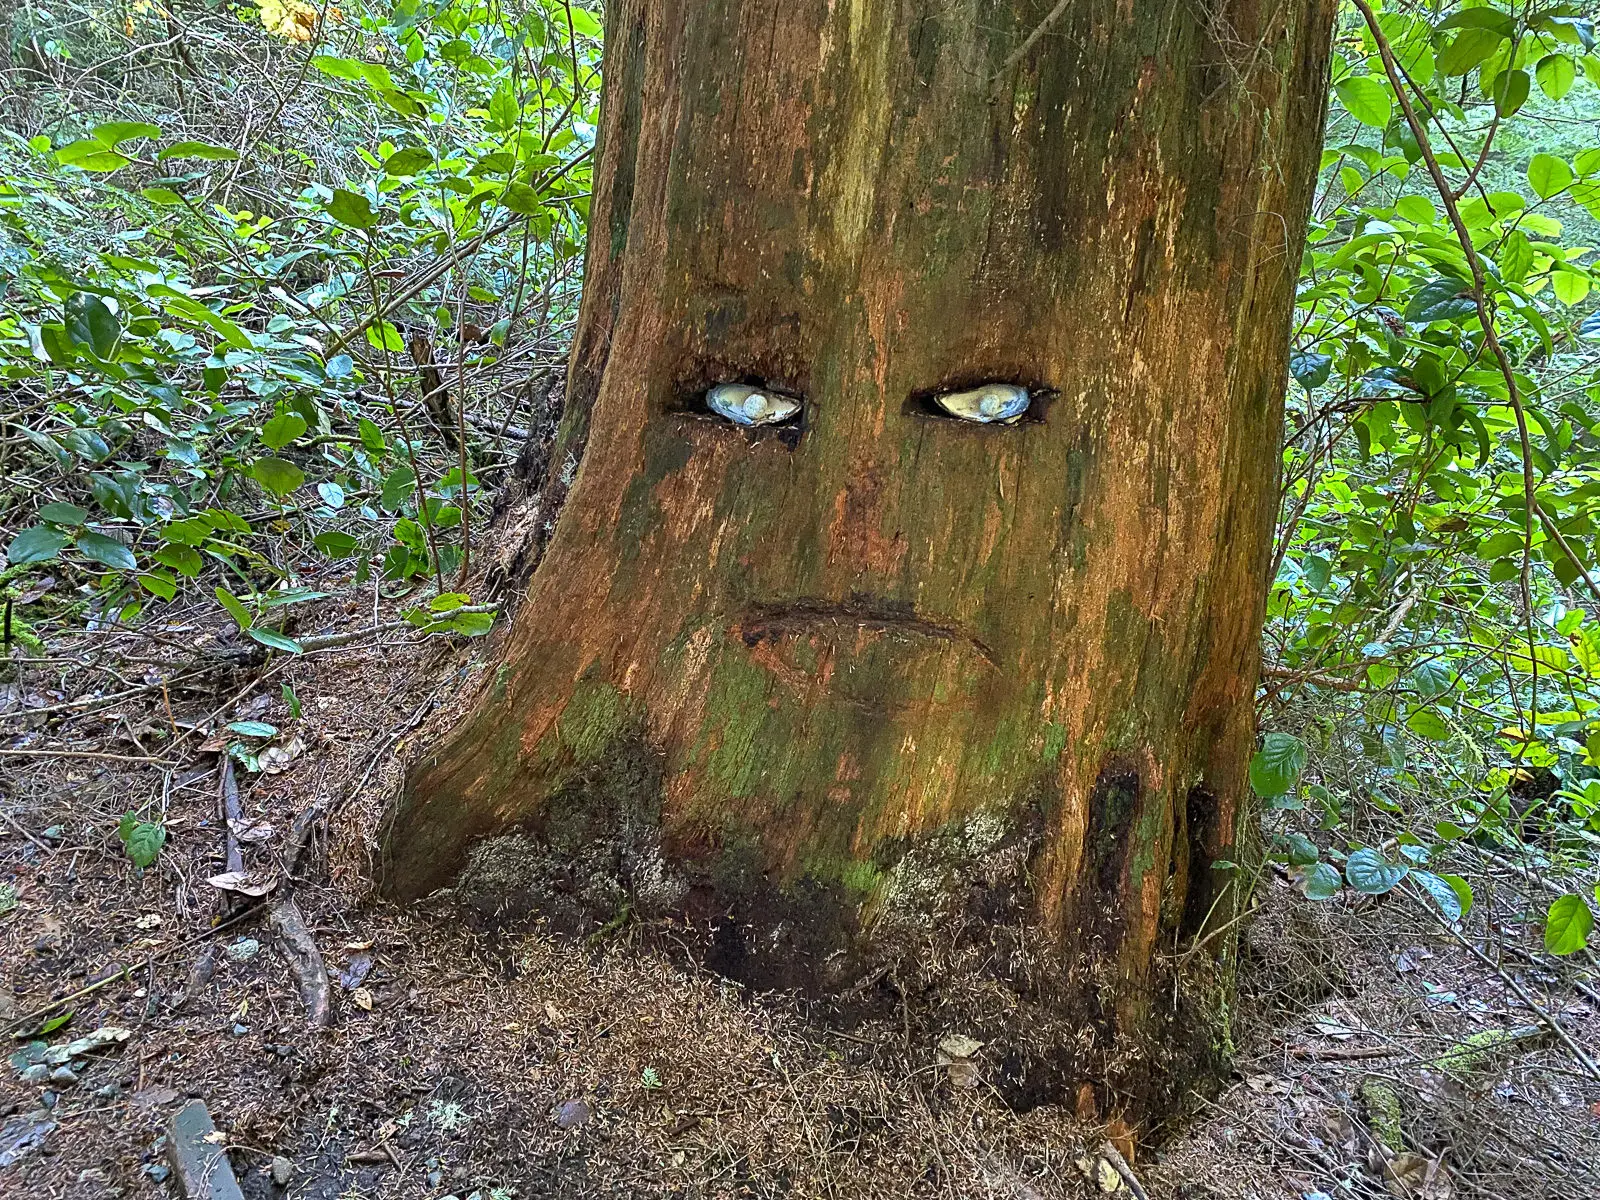 Eyes carved into a tree on the trail to Sandcut Beach